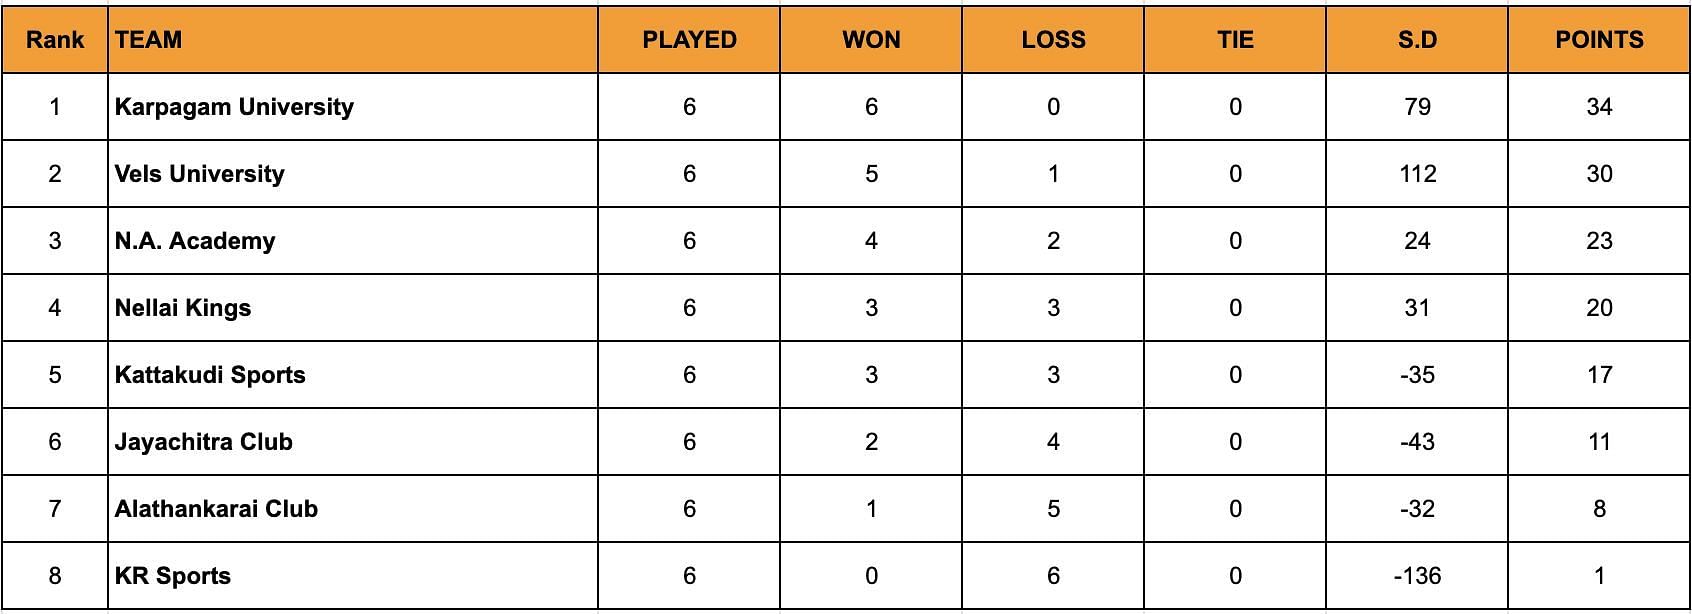 A look at the standings after the end of Day 6.